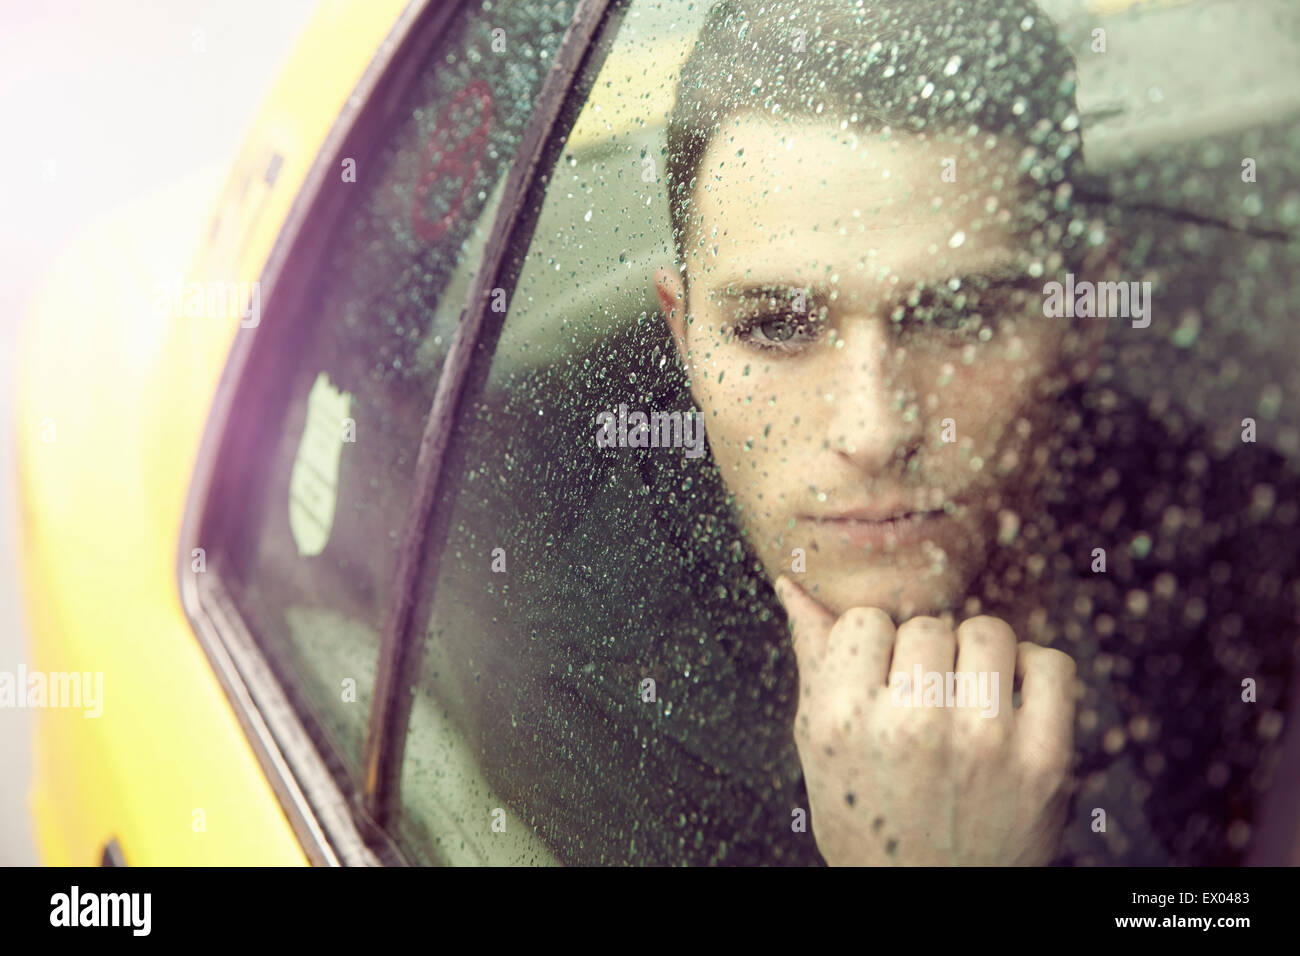 Young man gazing out of yellow cab window in rain Stock Photo